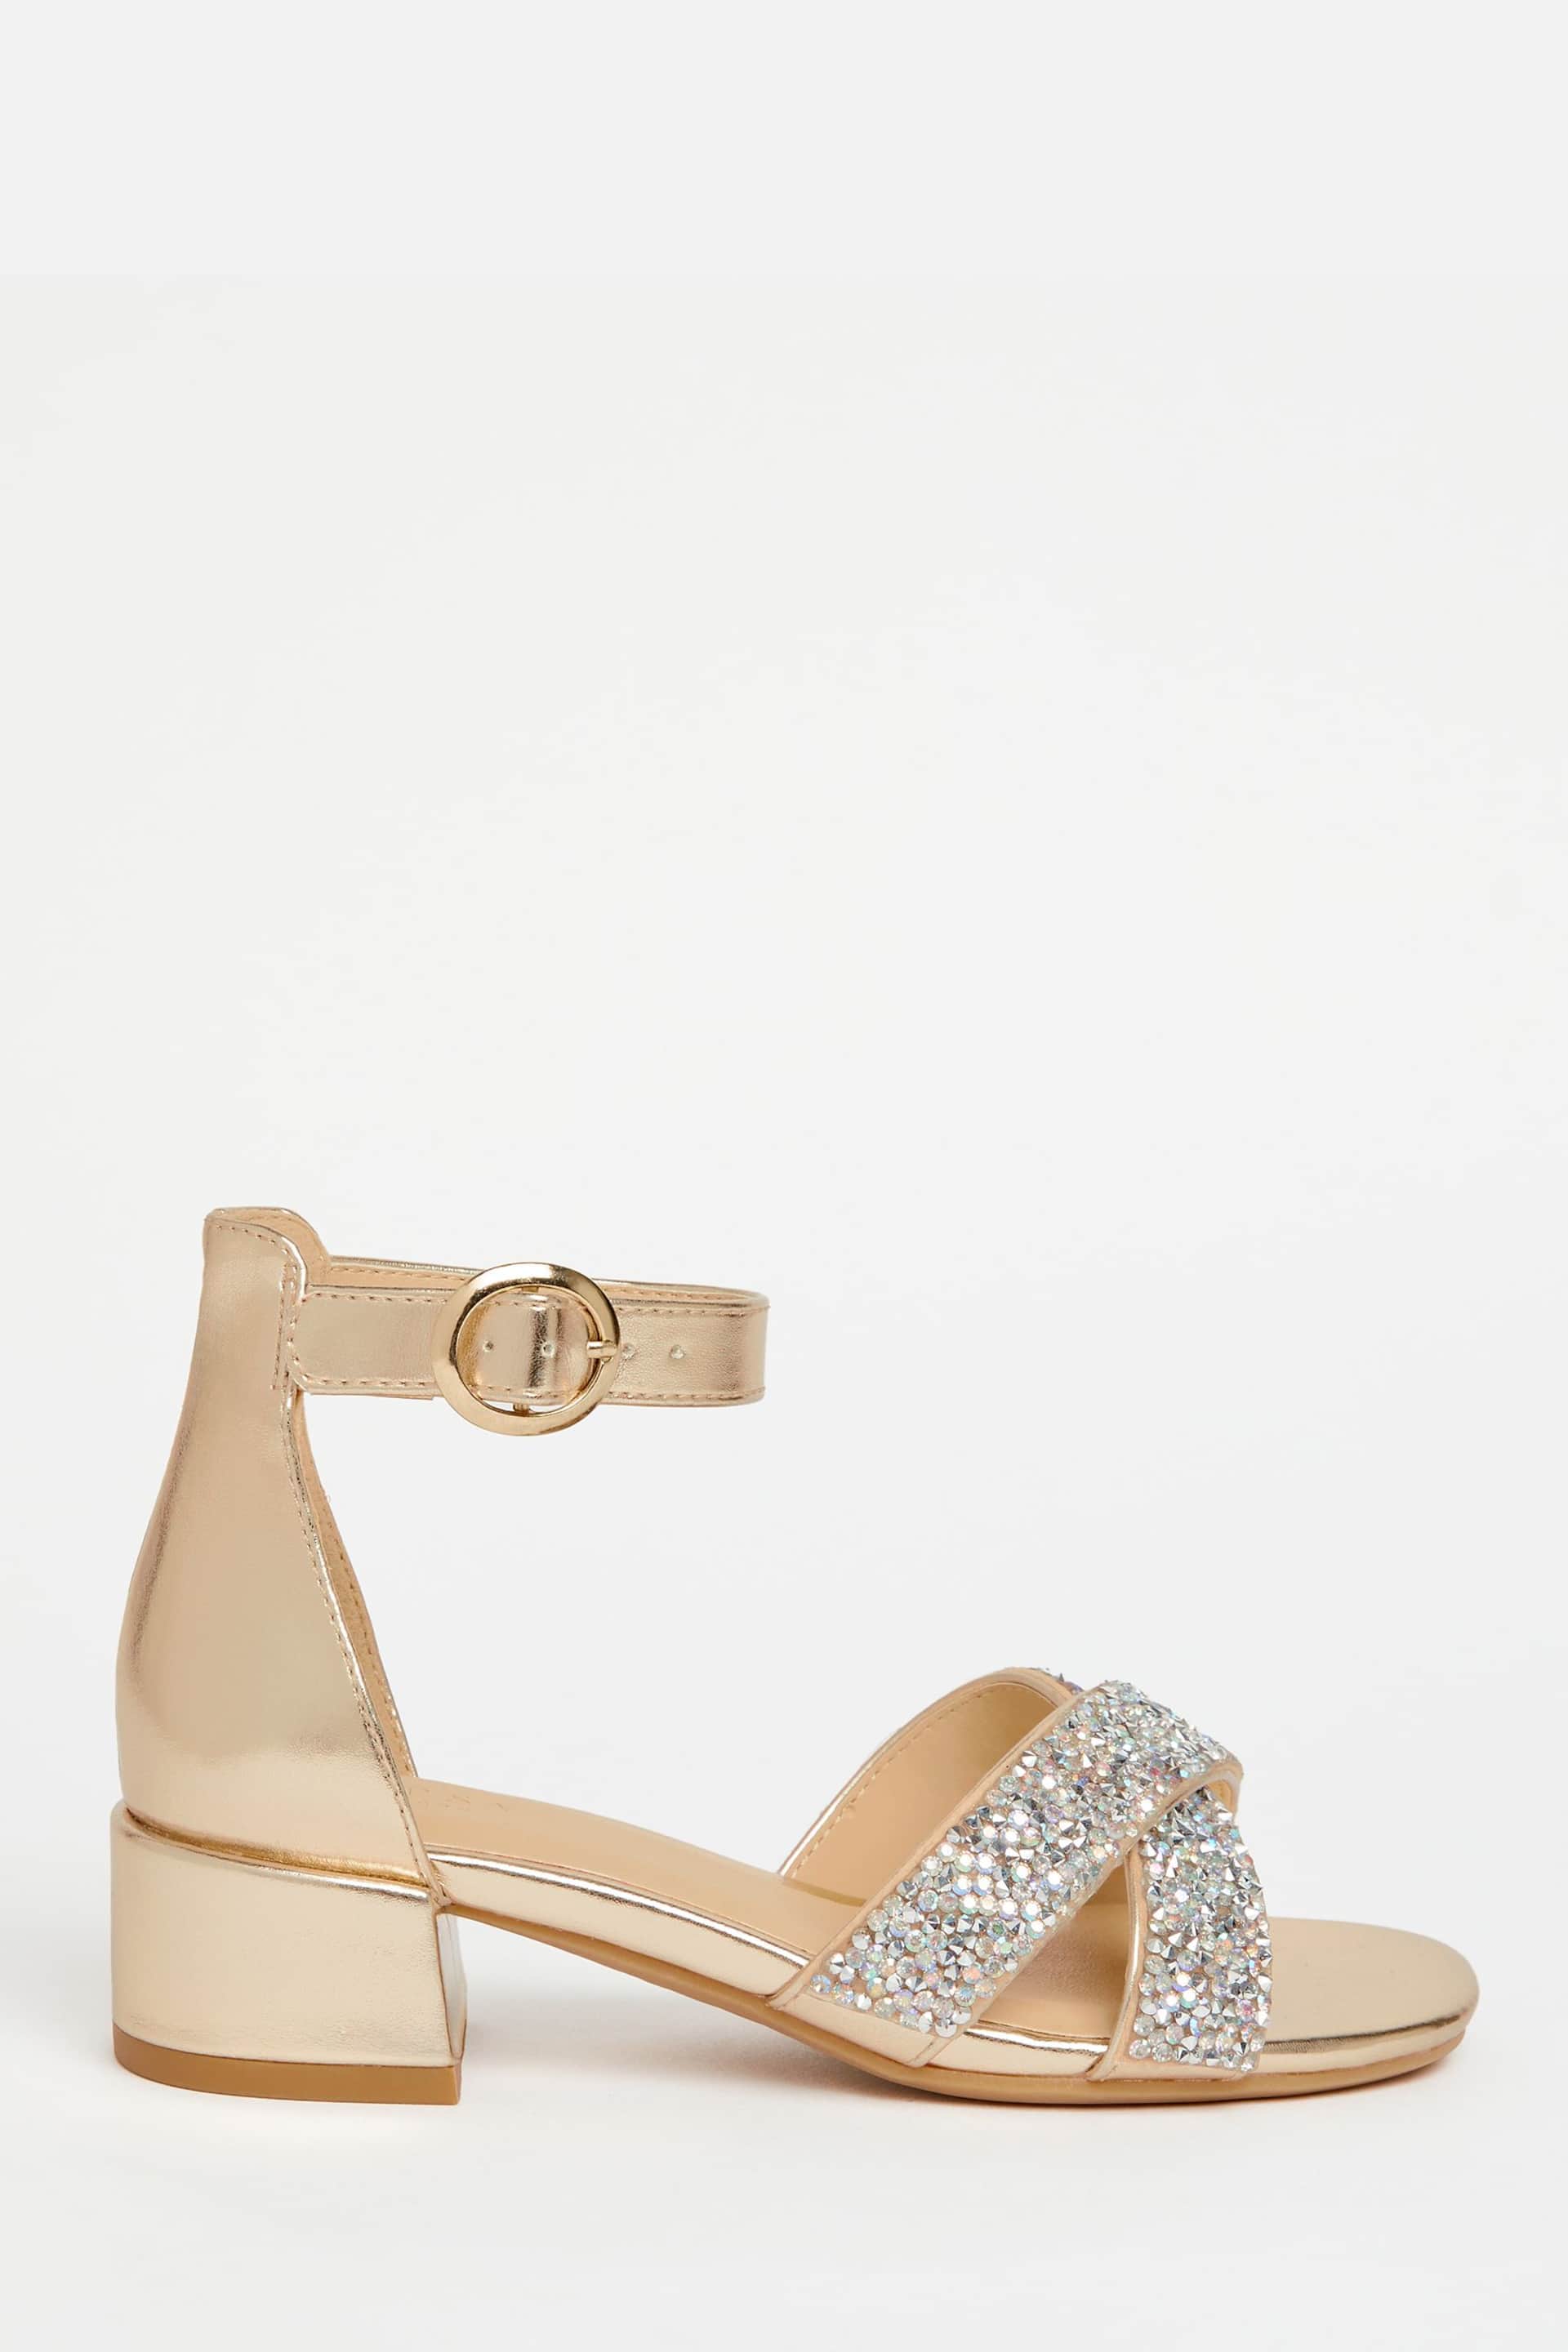 Lipsy Gold Low Block Heel Occasion Sandal - Image 2 of 4